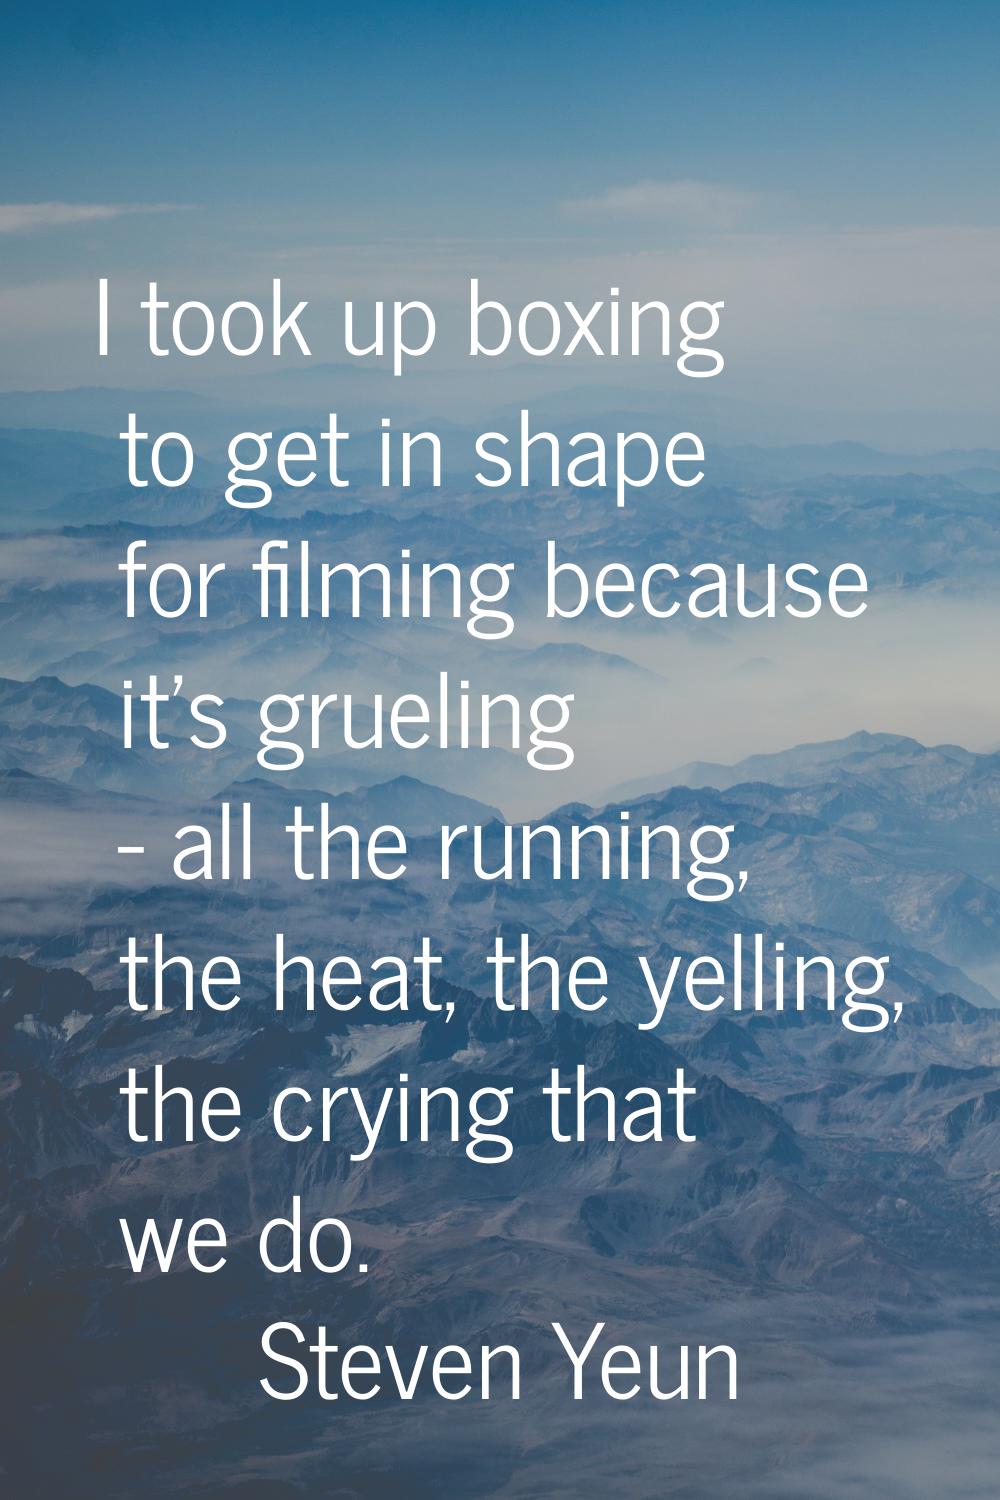 I took up boxing to get in shape for filming because it's grueling - all the running, the heat, the